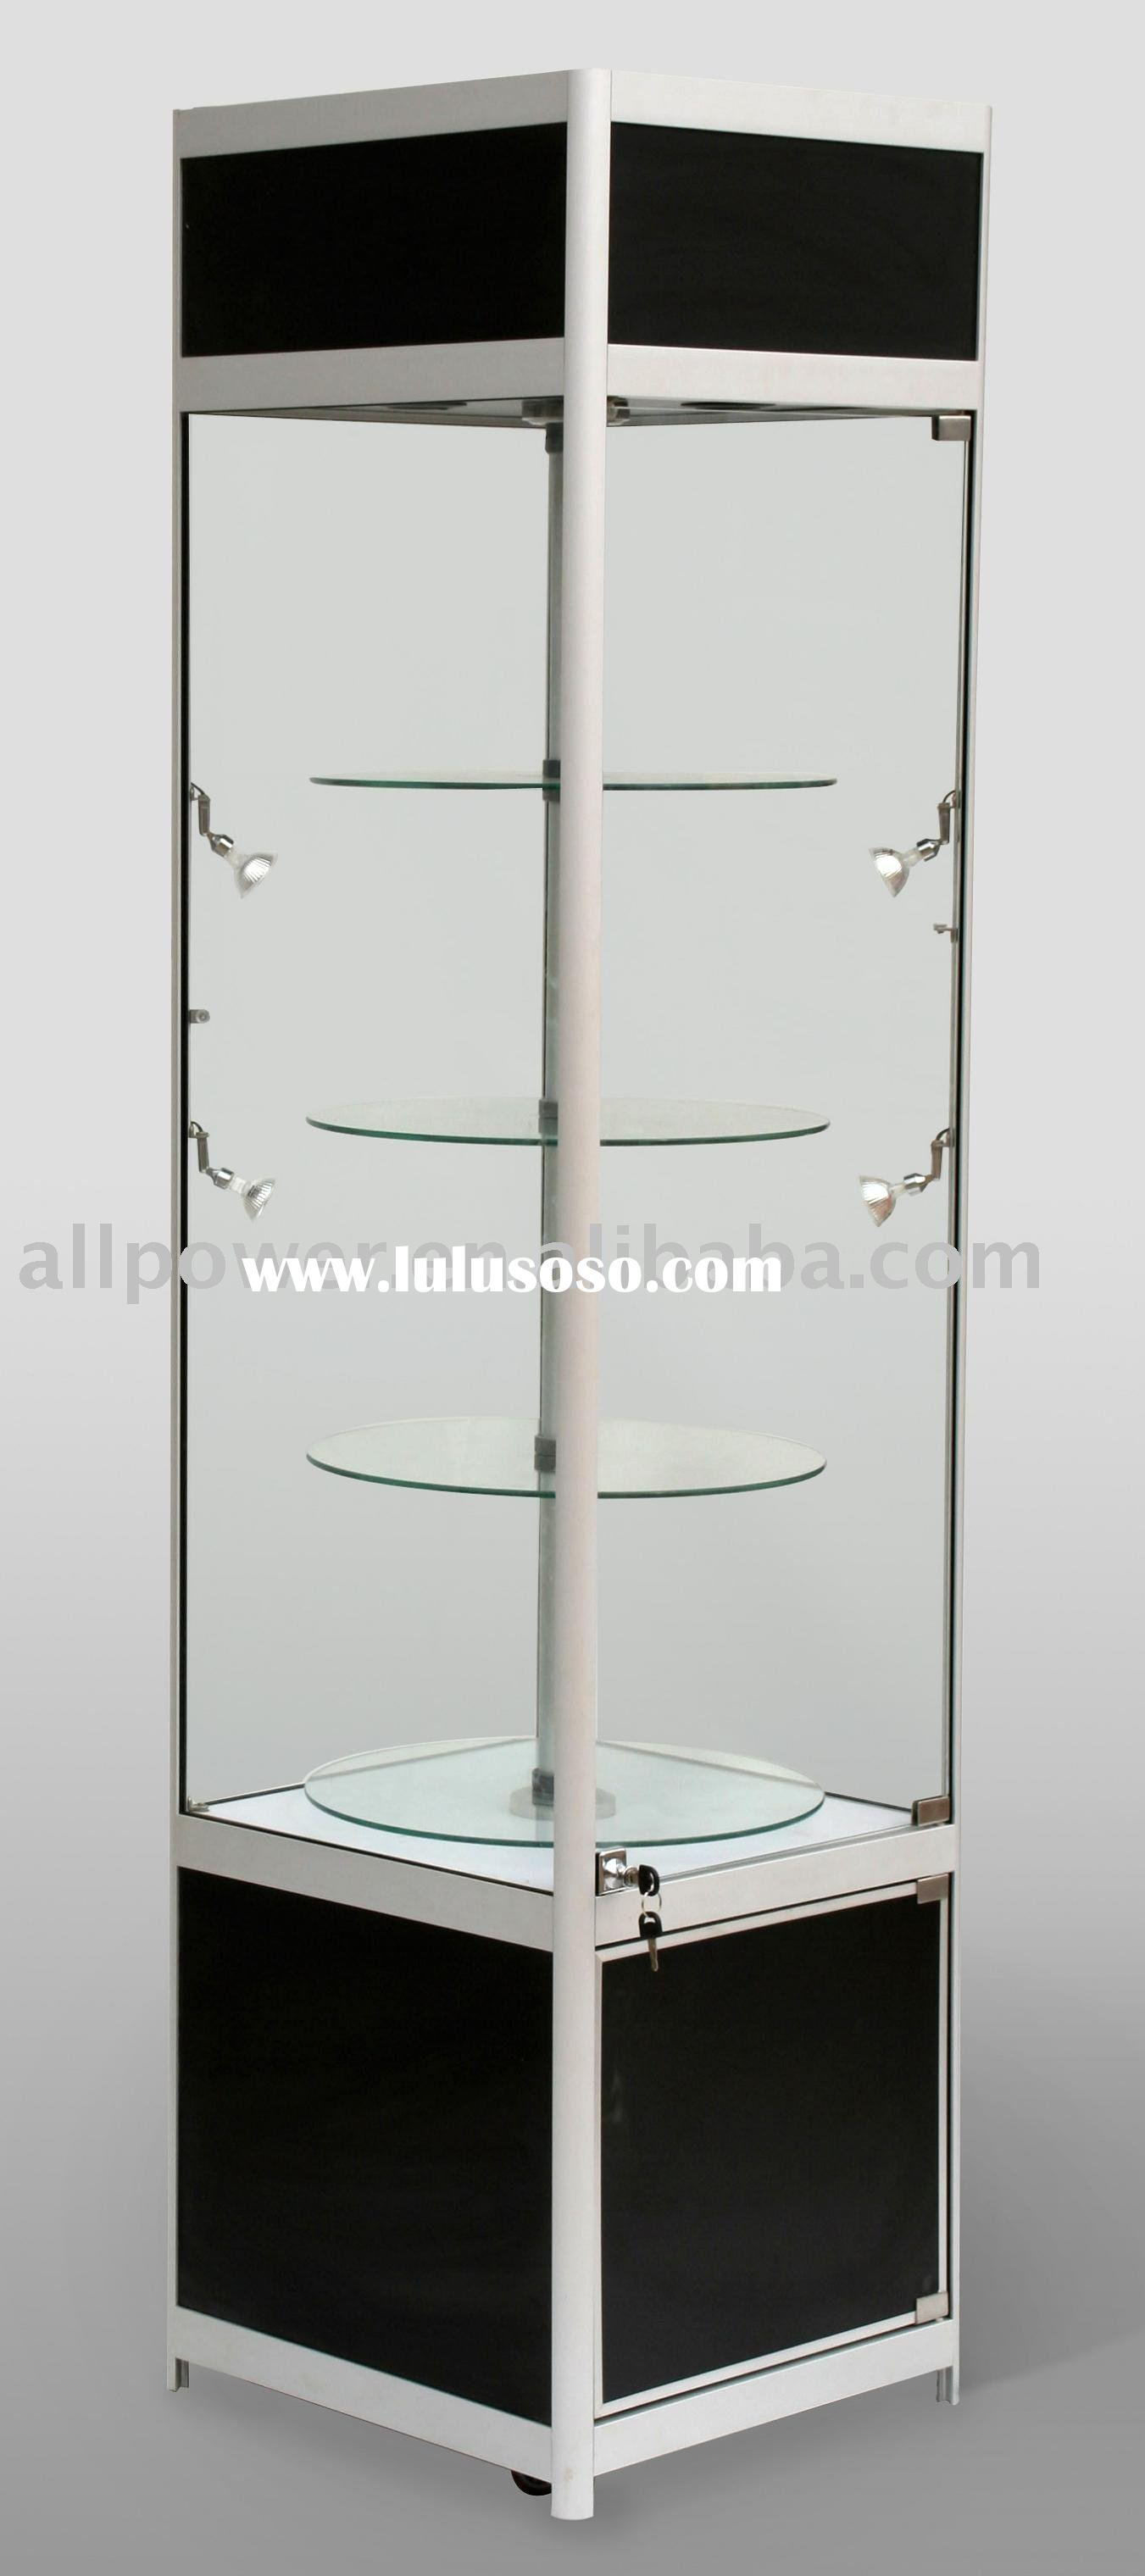 Revolving Display Cabinet 53 With Revolving Display Cabinet in size 1351 X 3040